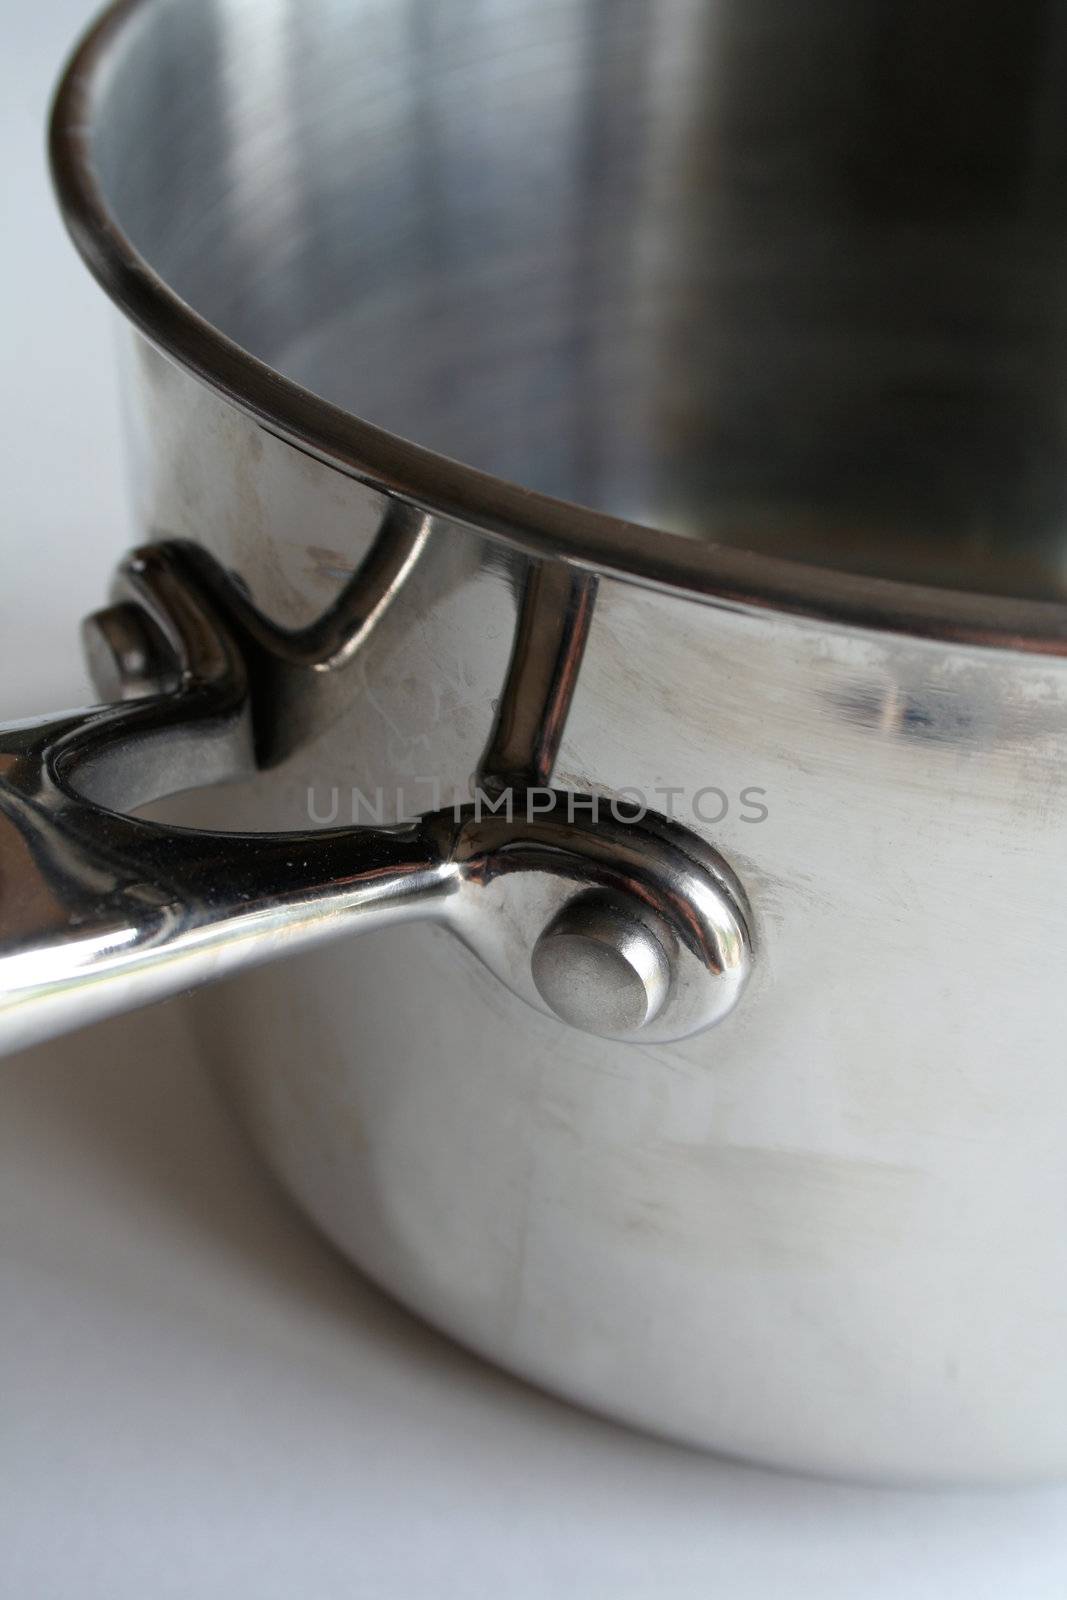 Stainless Steel Pot by ca2hill